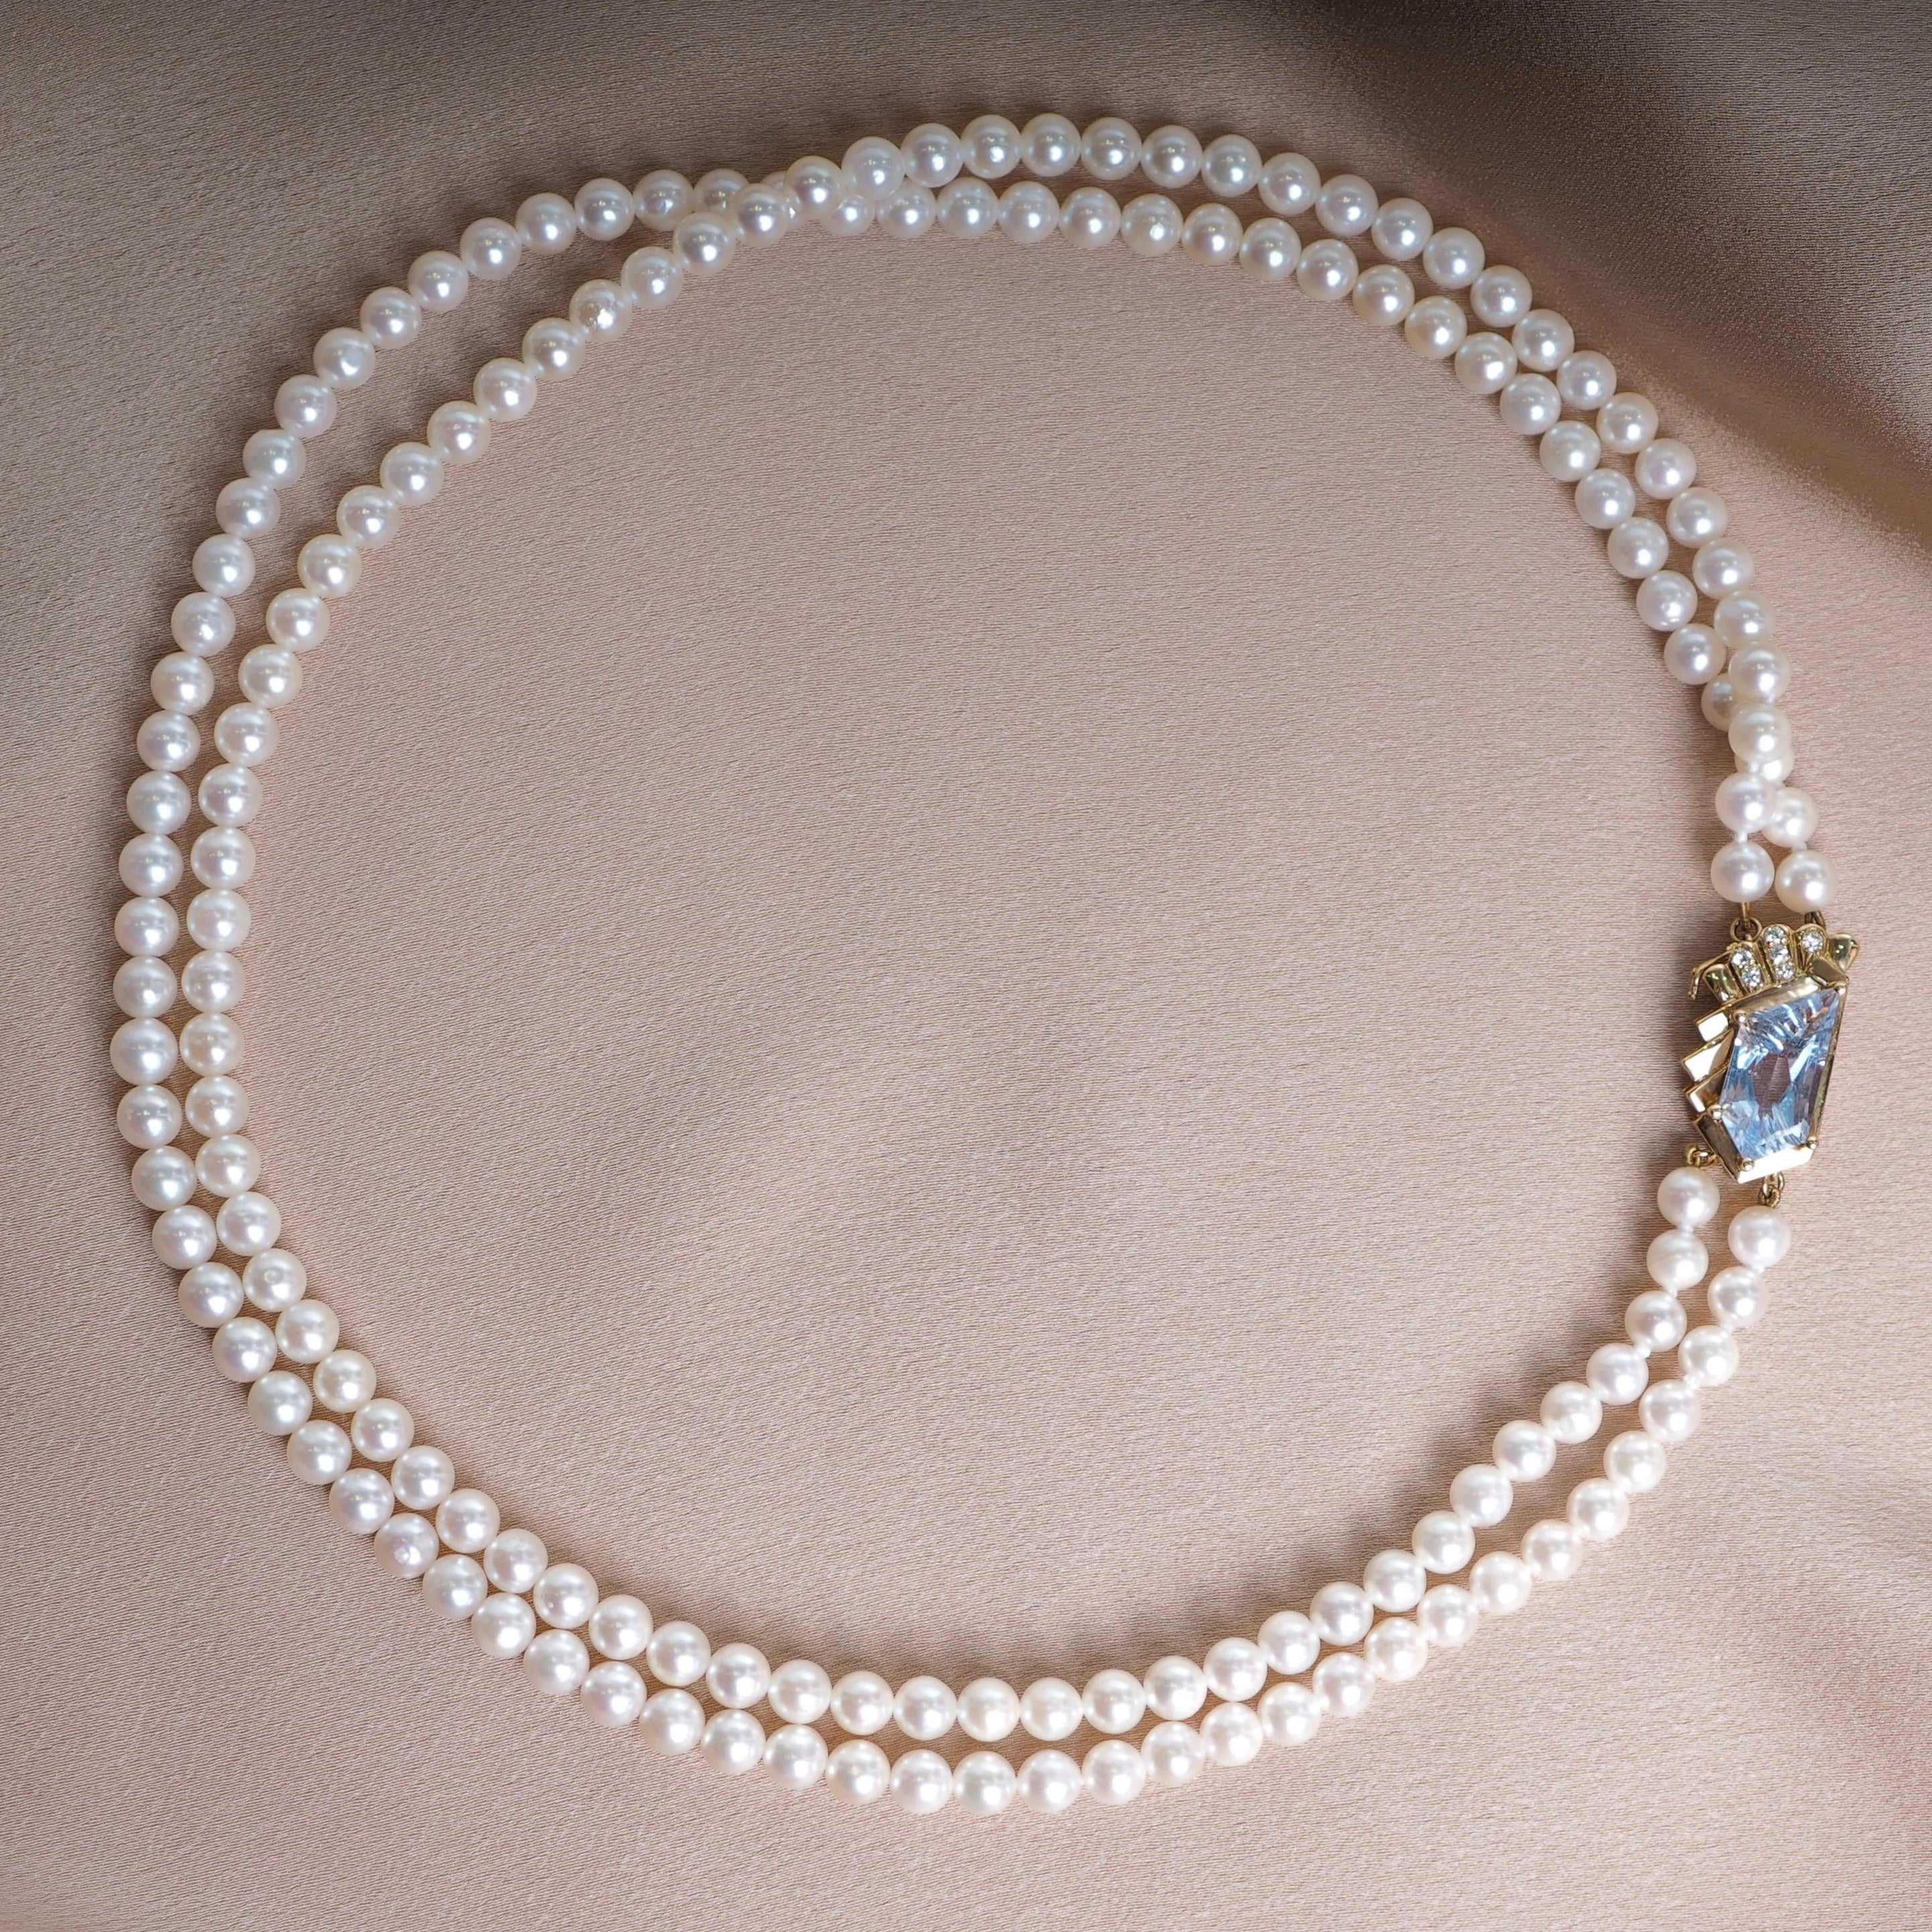 VINTAGE STYLE DOUBLE ROW PEARL NECKLACE